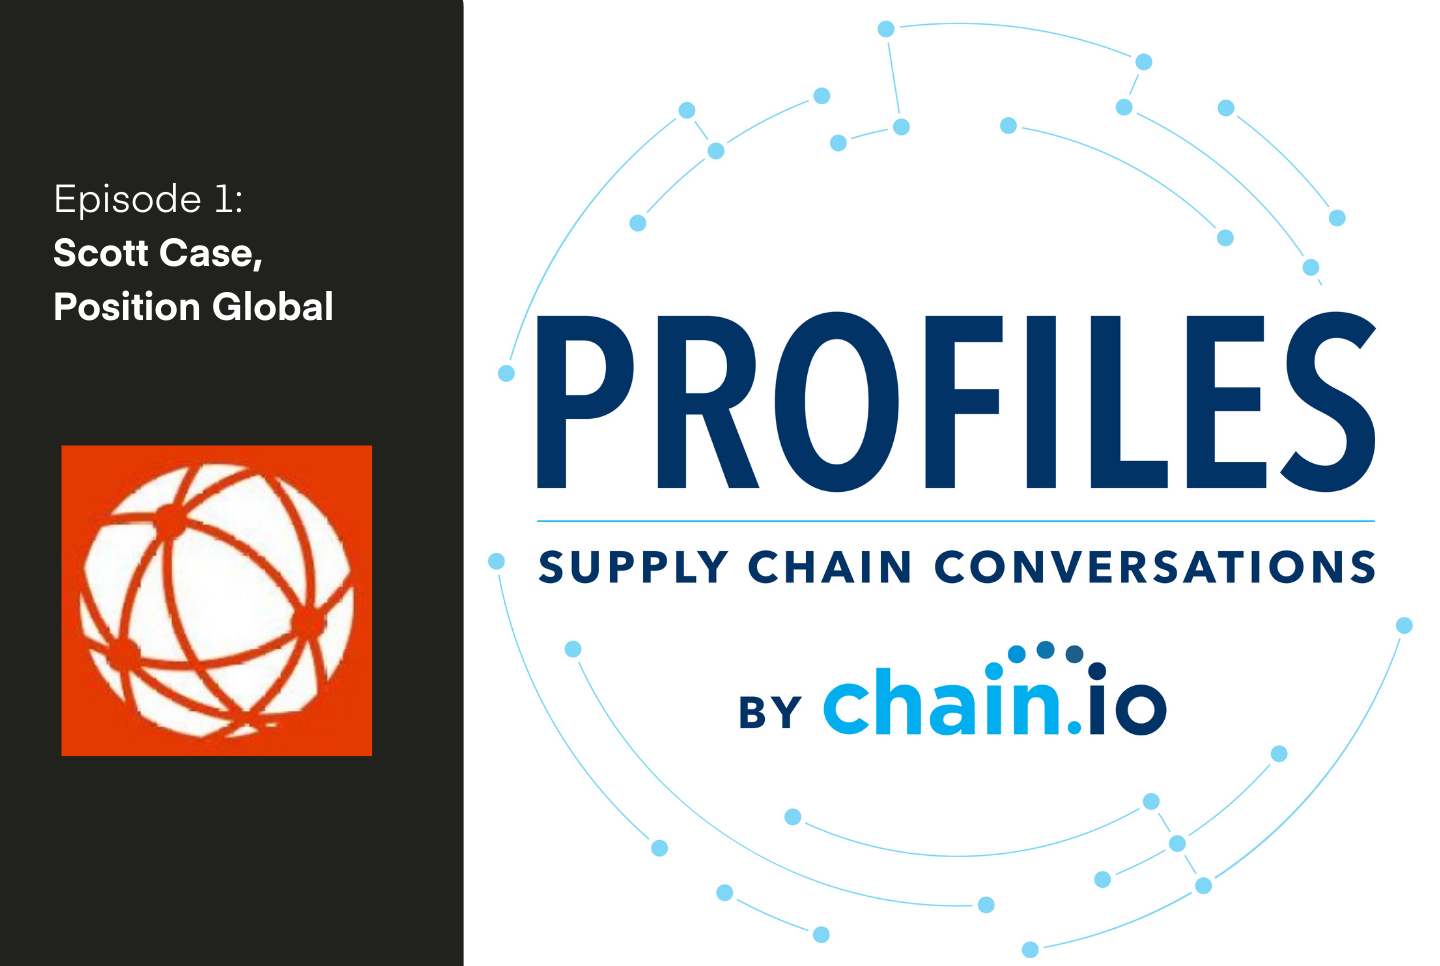 Presenting episode 1 of our new podcast, Profiles by Chain.io.  On each episode, we'll interview individuals from the Chain.io partner ecosystem focusing on the human stories of our extended supply chain family.